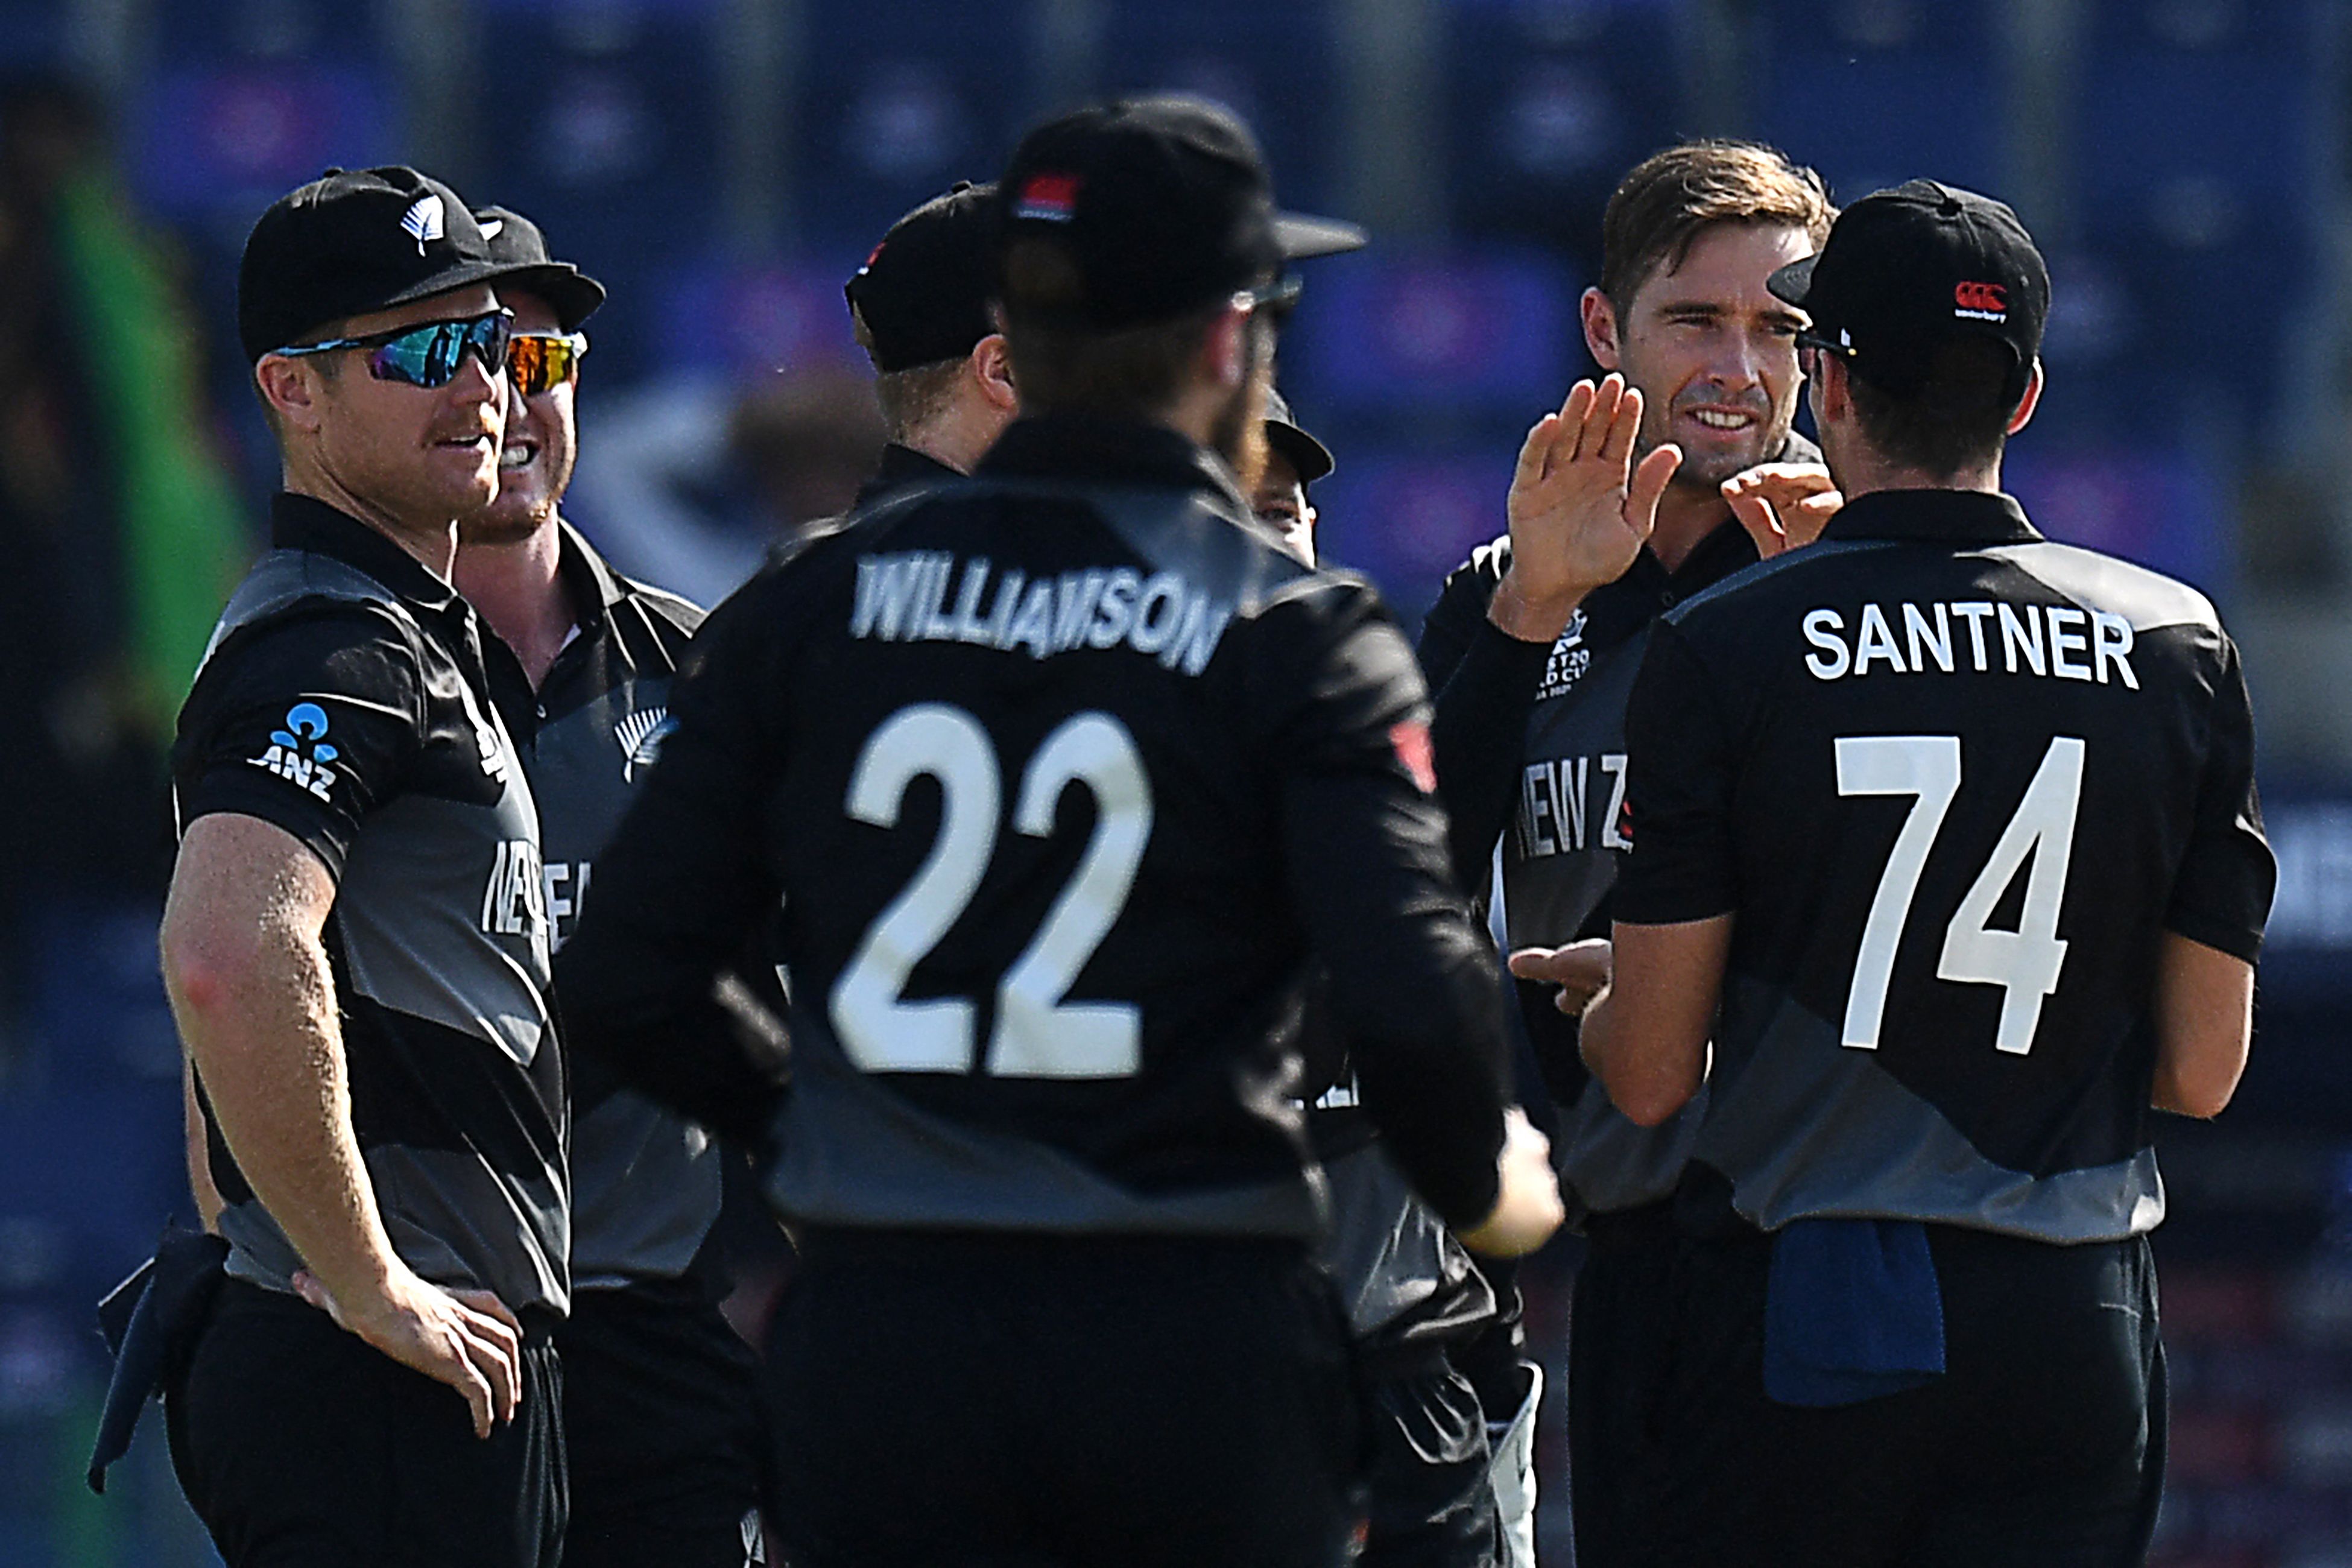 Twitter reacts as India crash out of T20 World Cup 2021 as New Zealand beat Afghanistan to enter semi-final